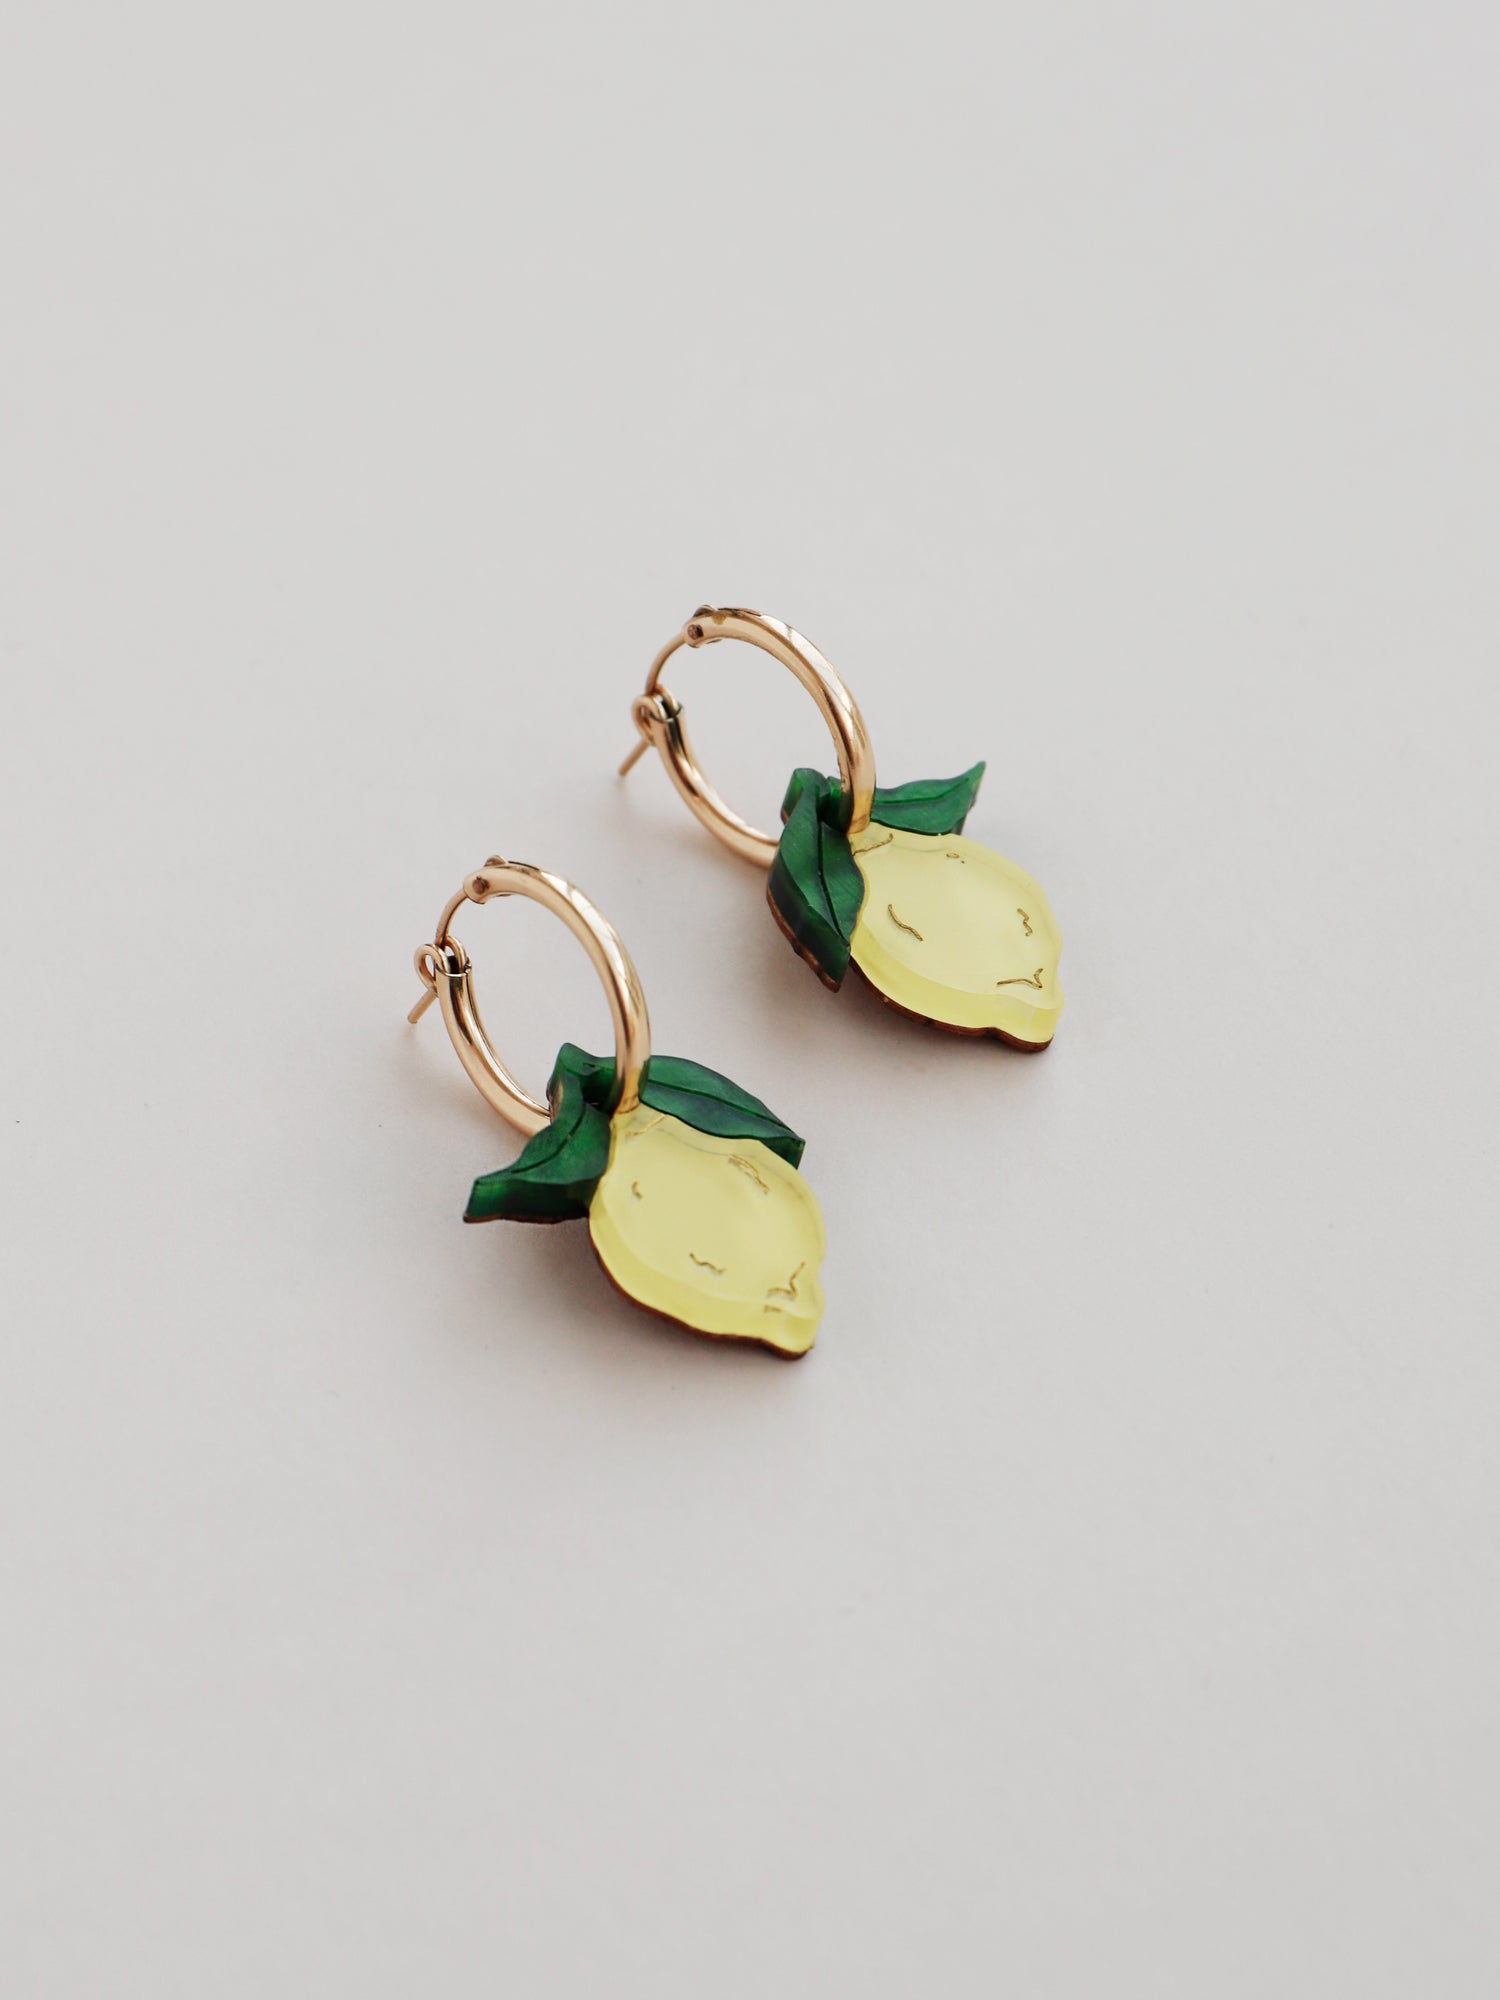 Lemon hoops made with wood, 64% recycled acrylic and hand-inked details with sterling silver earring posts & butterflies. Handmade in the UK at Wolf & Moon.